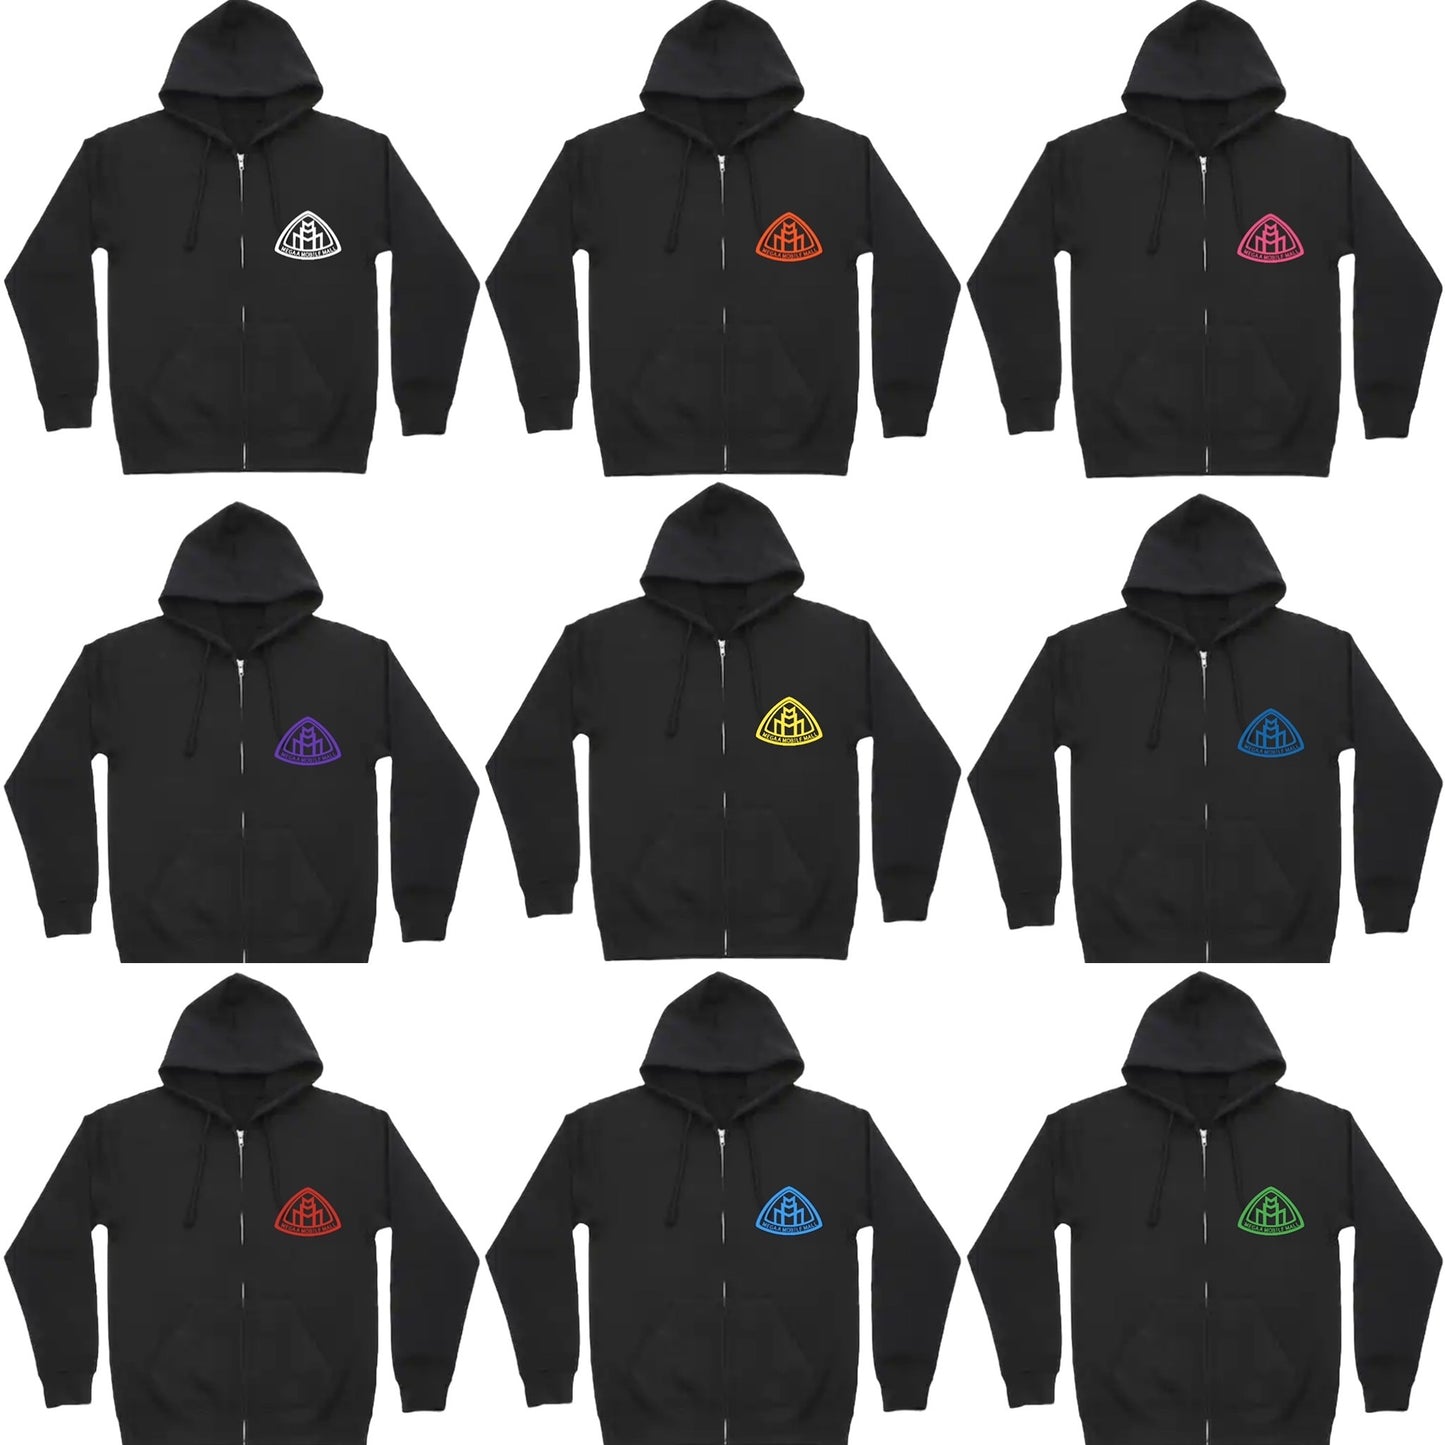 megaamobilemall black zip up hoodie in 9 different logo color options front side